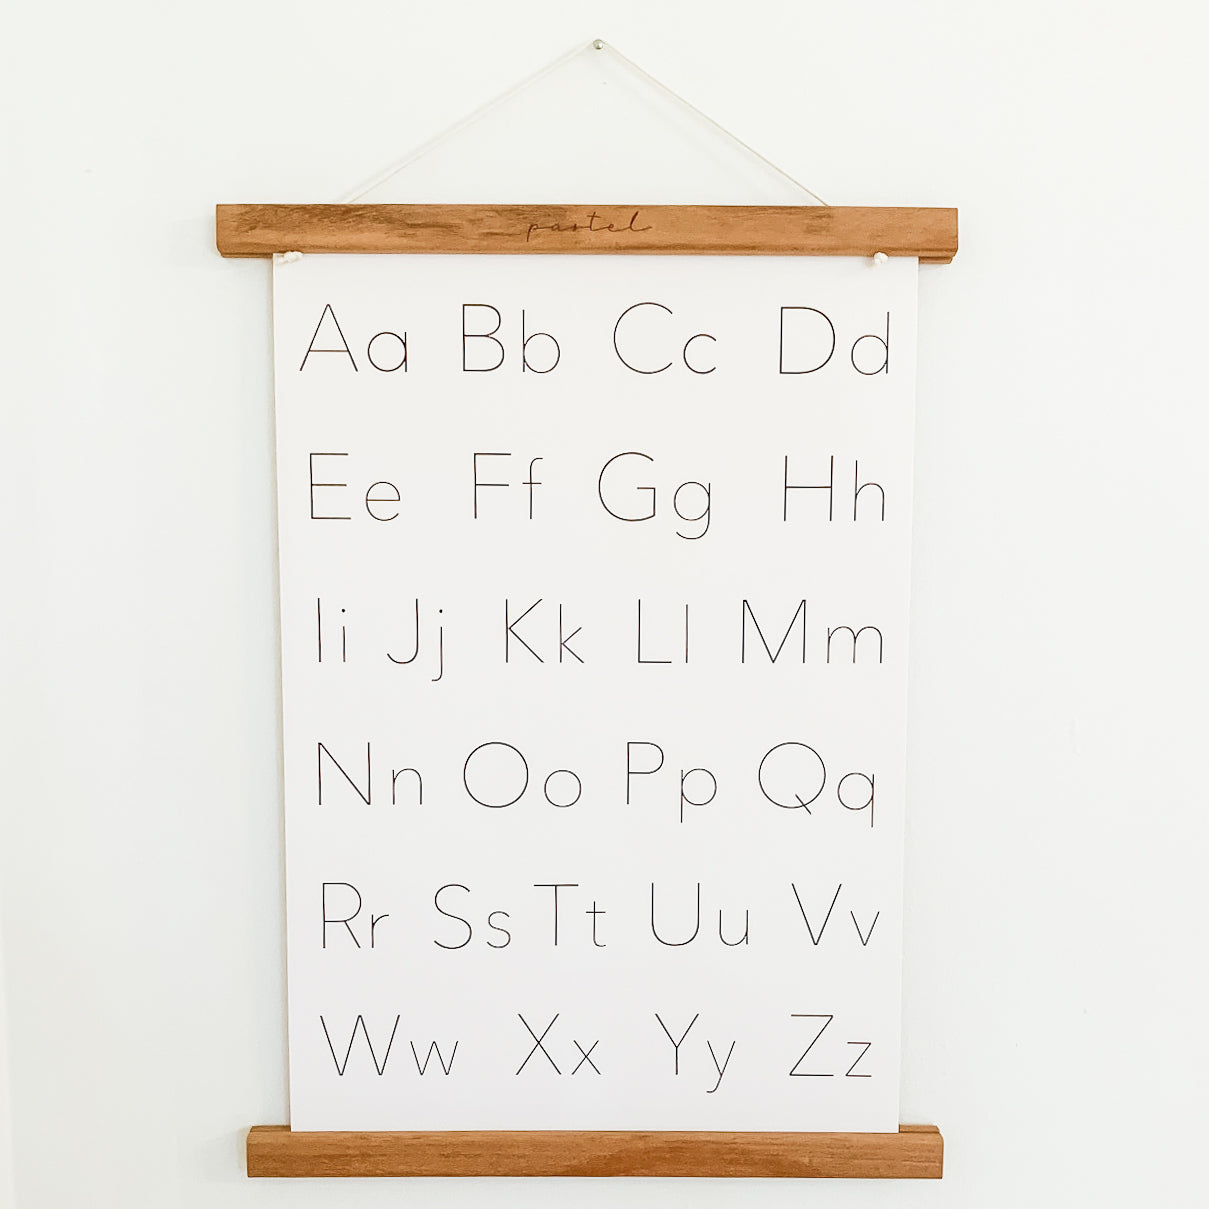 Decorative & Educational Poster "Uppercase & Lowercase Letters"